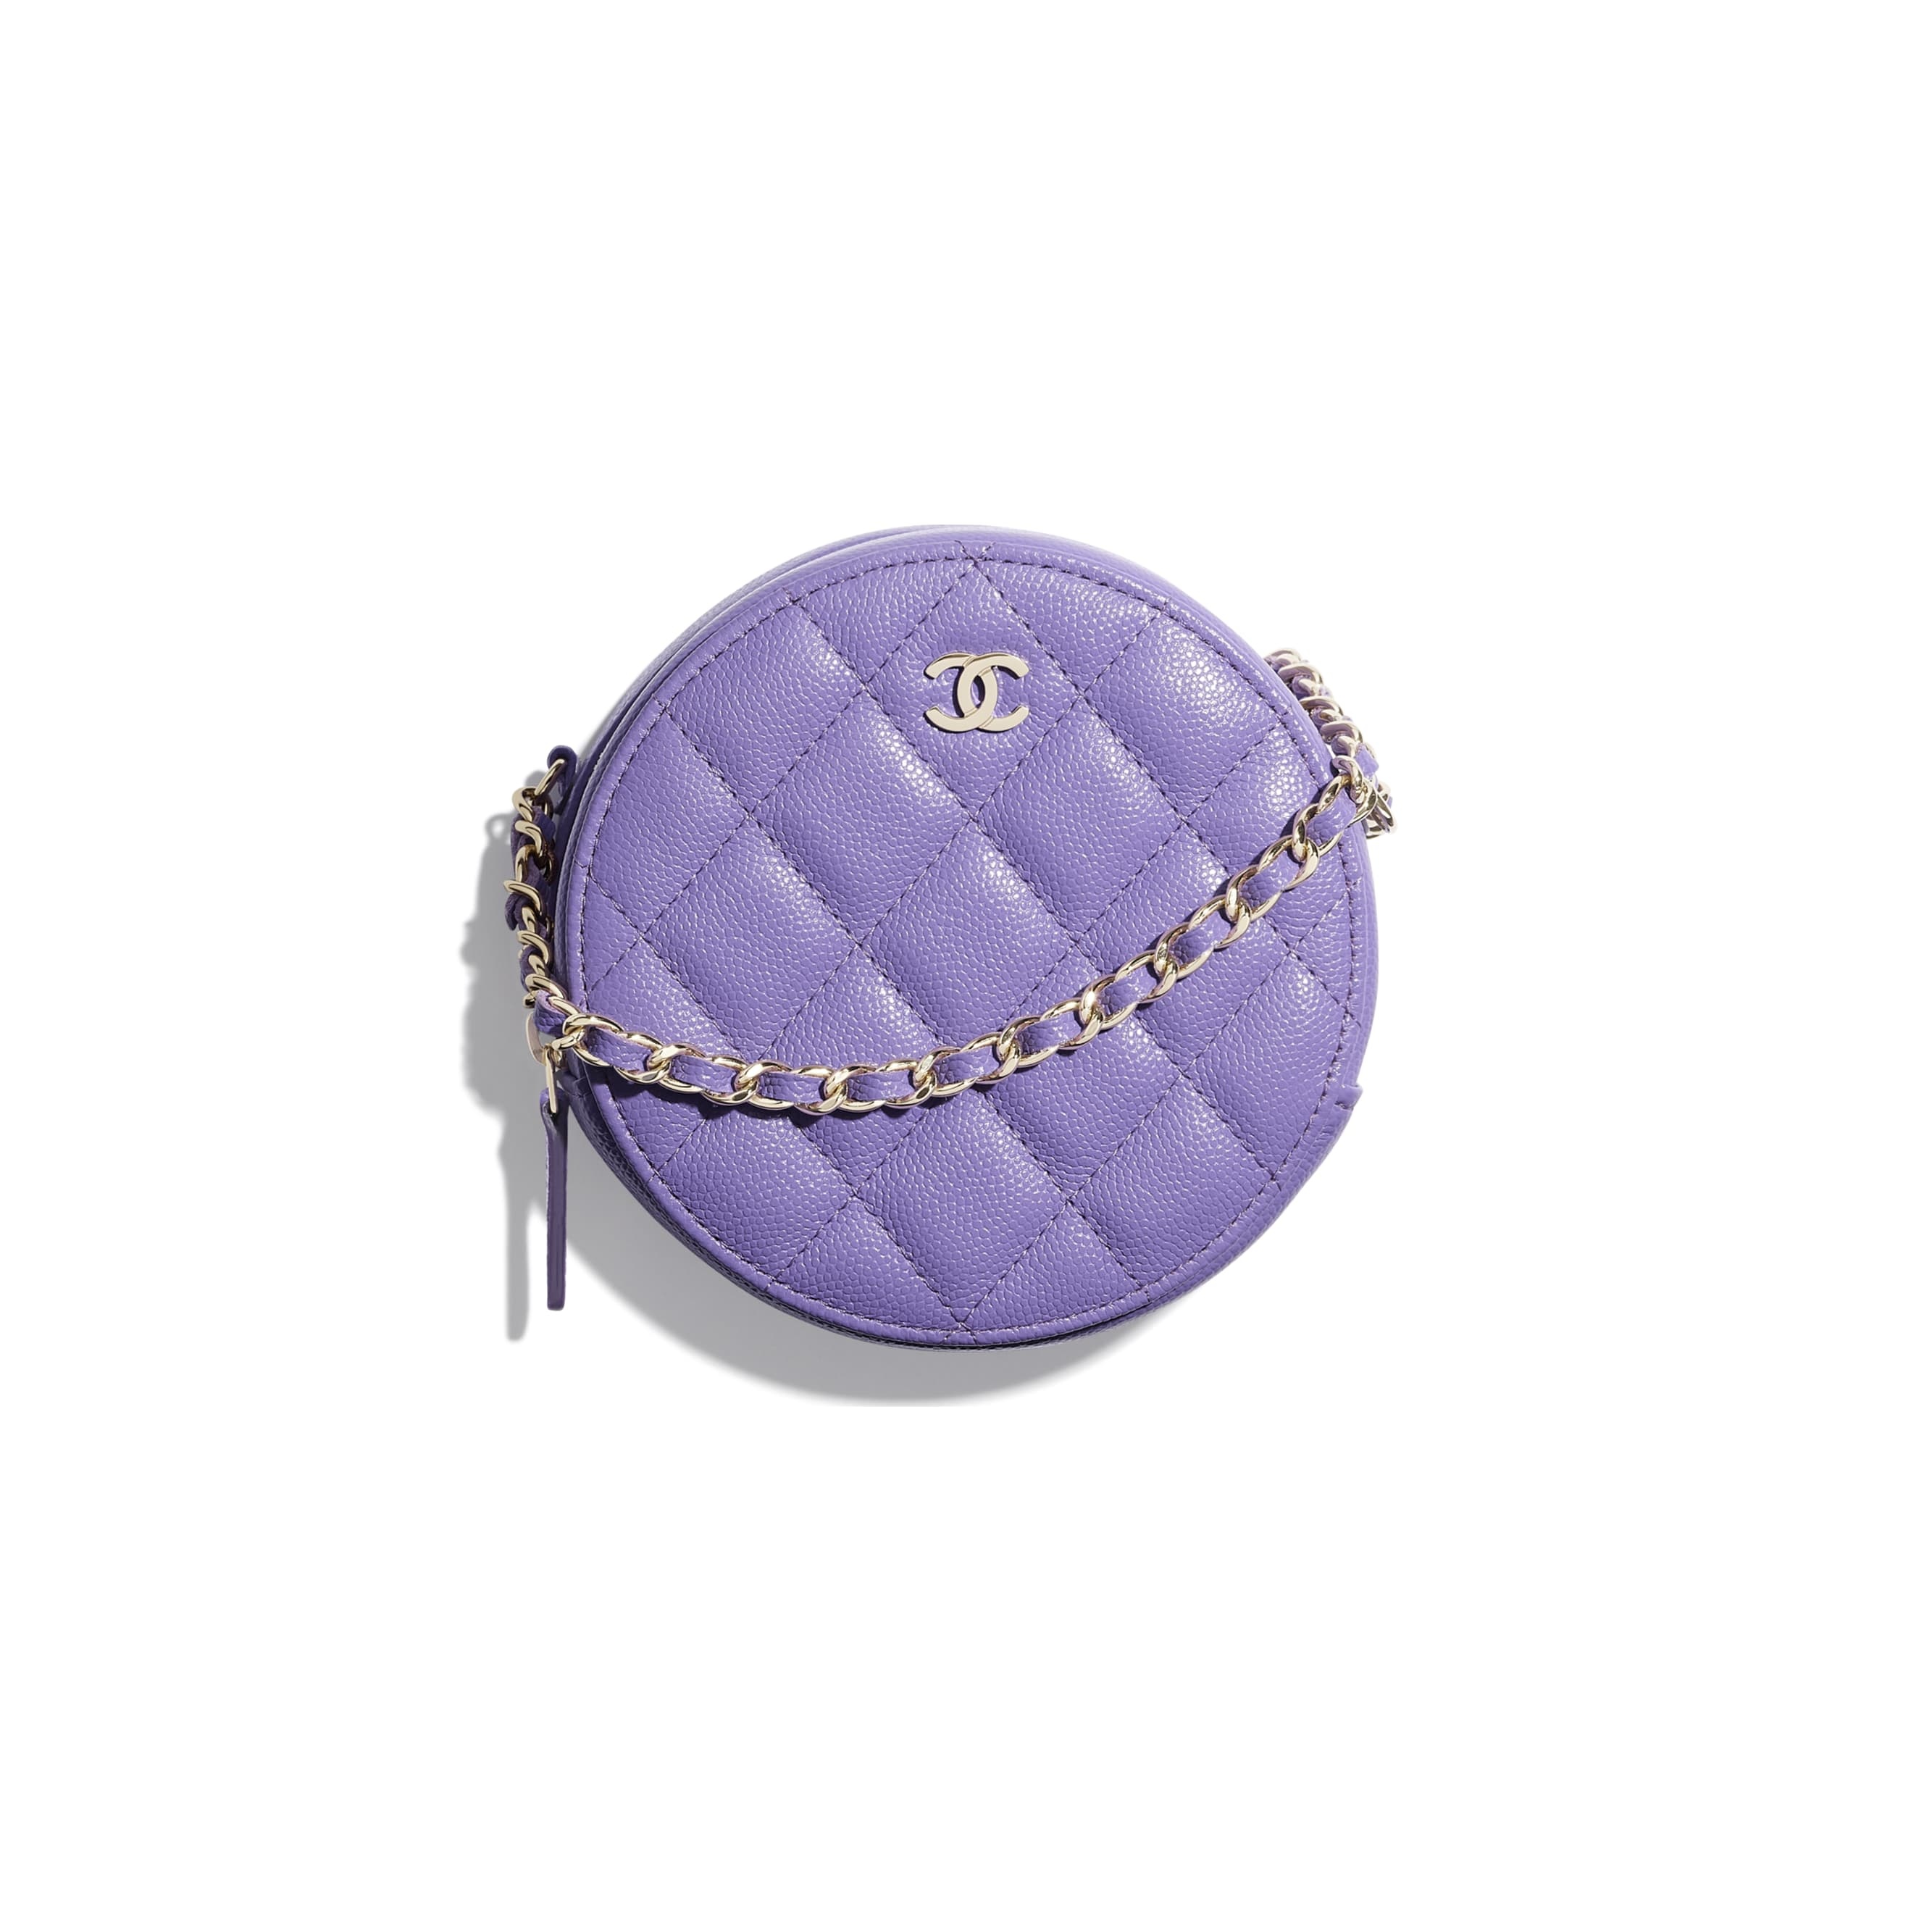 Classic Clutch with Chain - 1